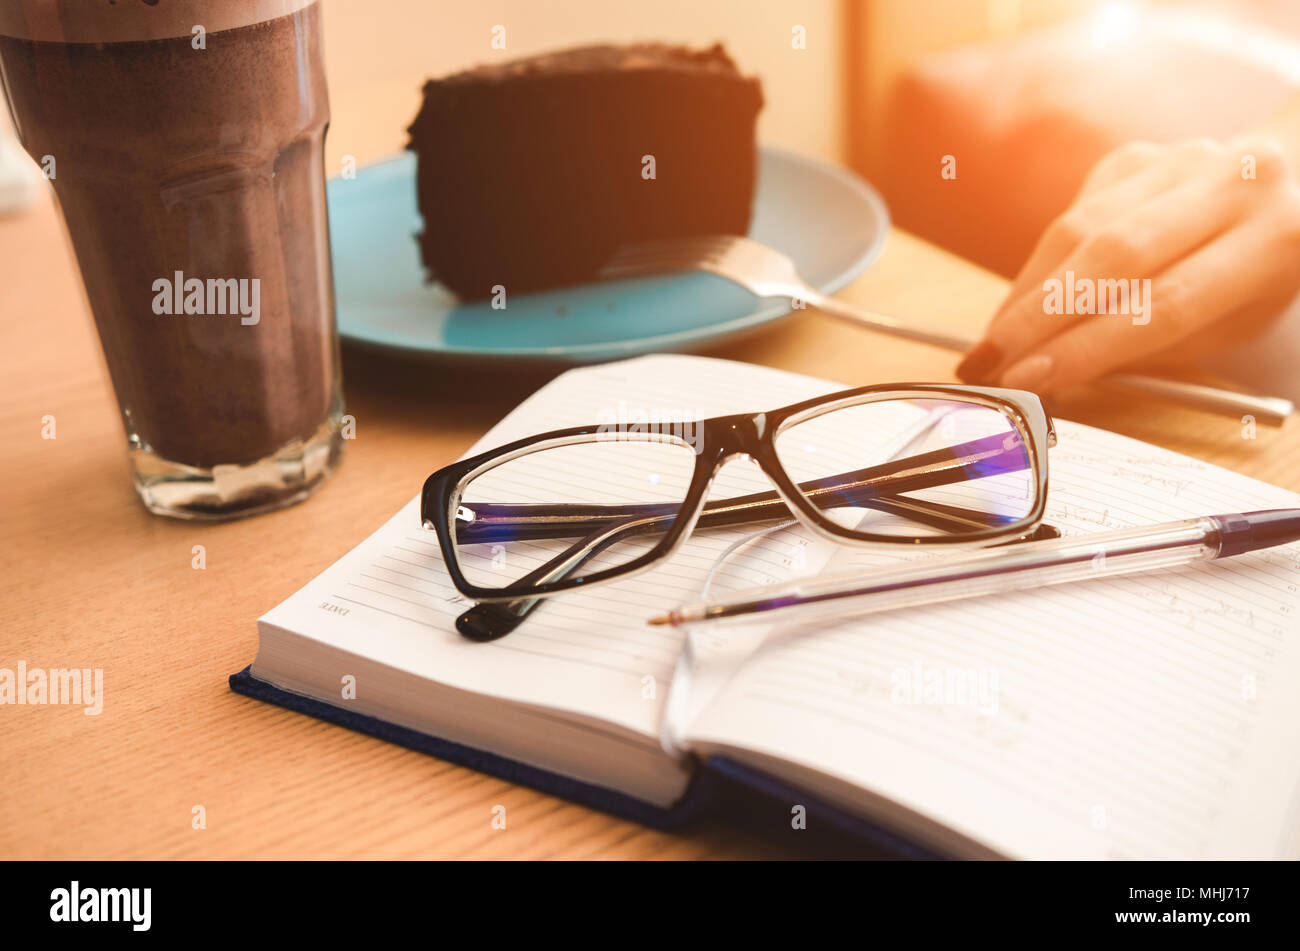 Still life: Eyeglasses and pen on open notebook.  Coffee cup and piece of cake. Fork in hand. Planning concept Stock Photo